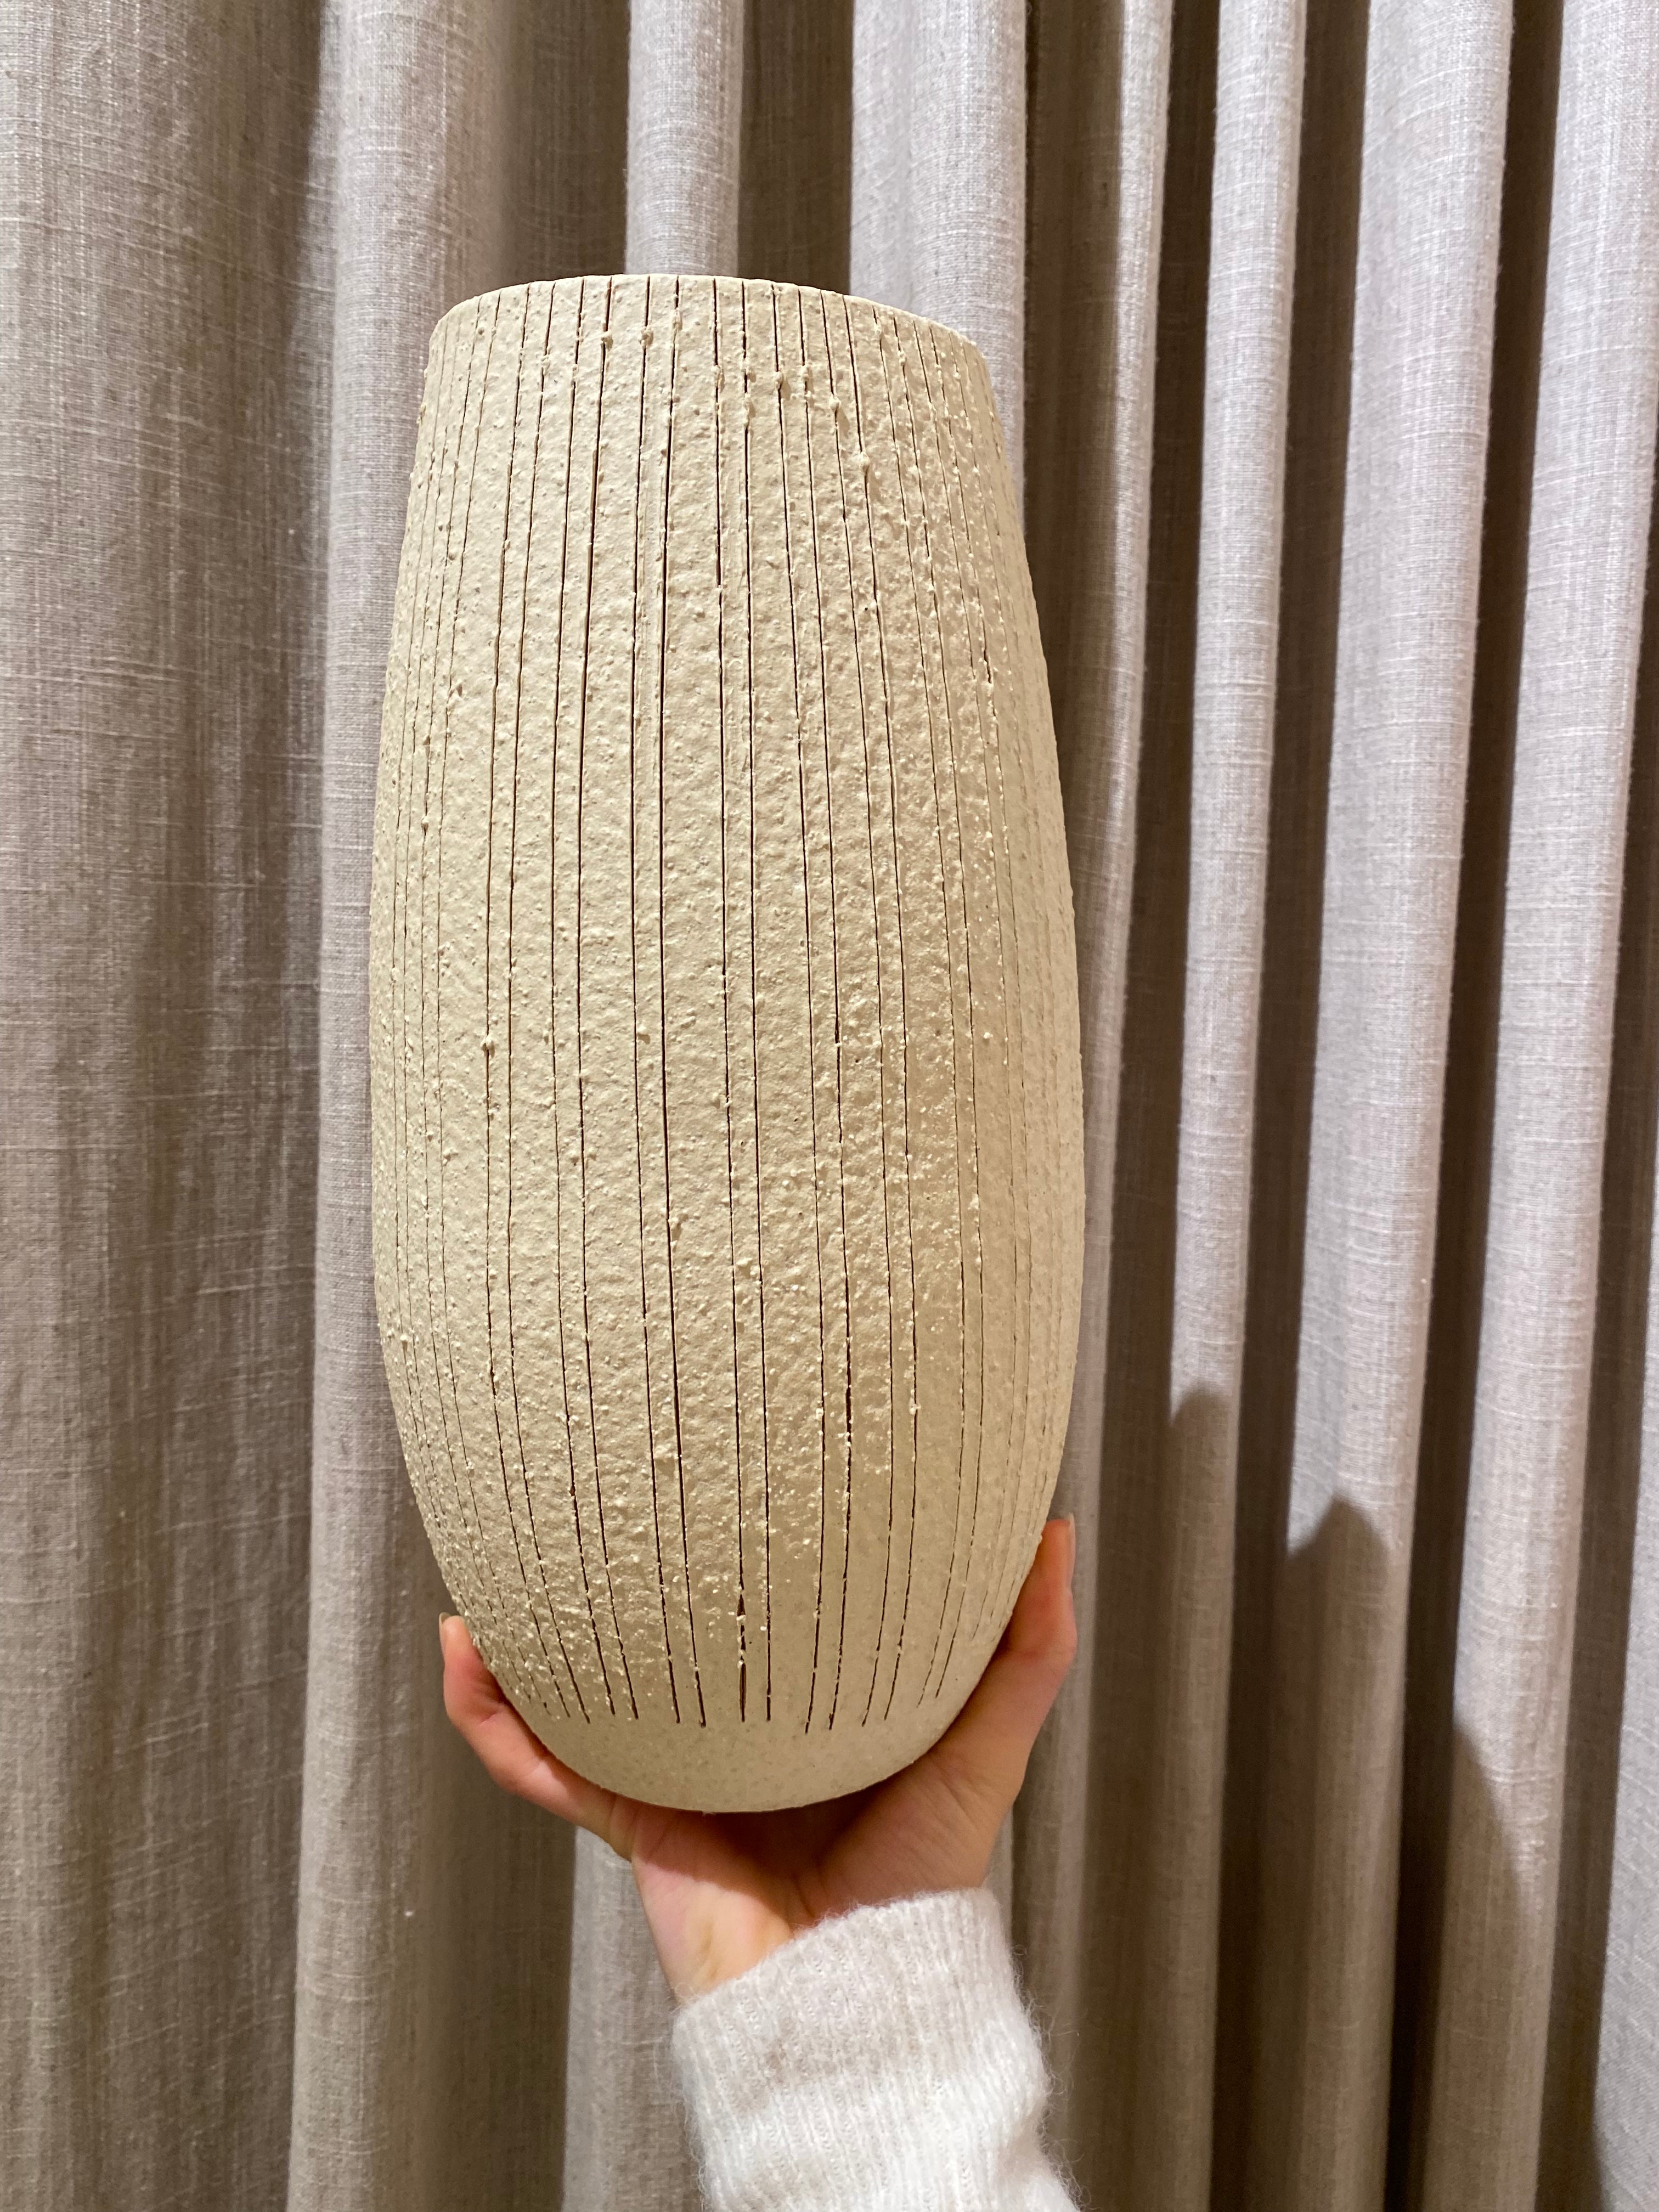 Large handmade vase in beige with stripes